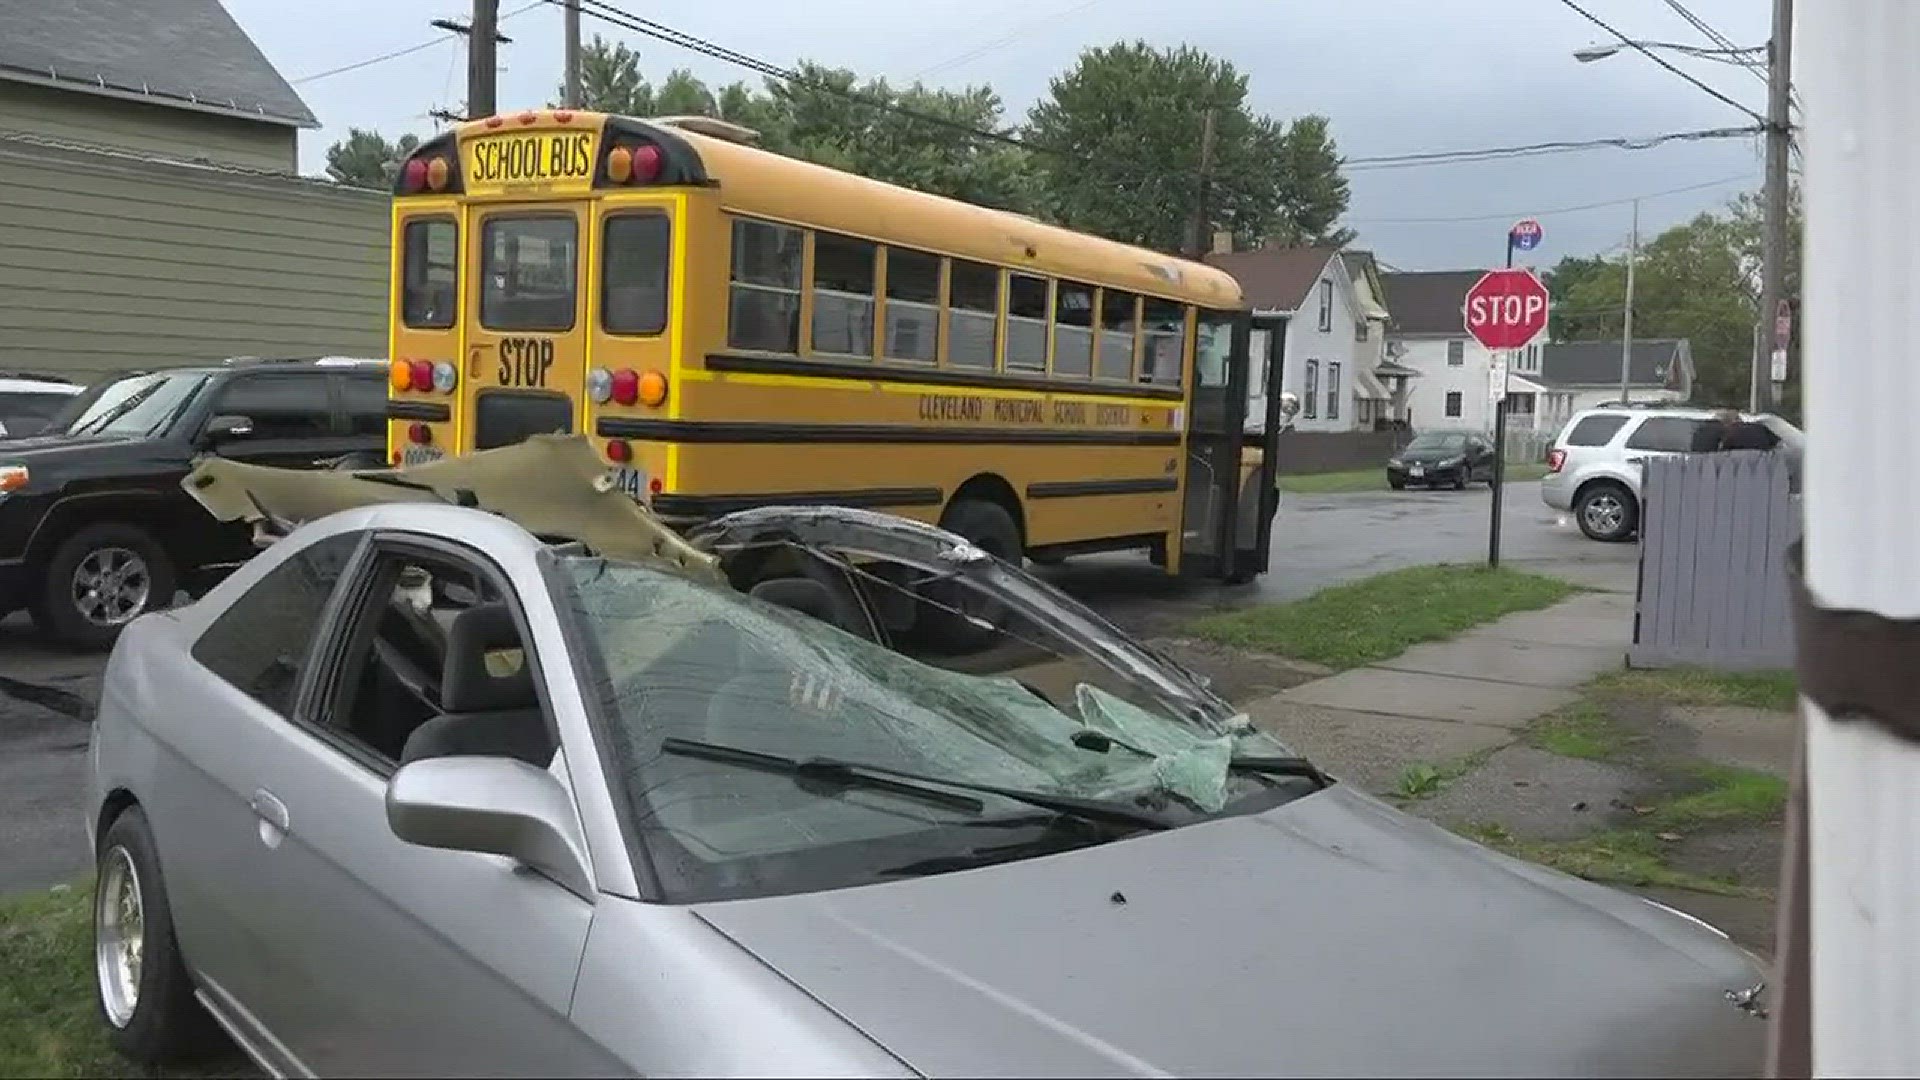 Aug. 22, 2017: Multiple elementary school students were taken to the hospital after a Cleveland school bus was involved in a crash.